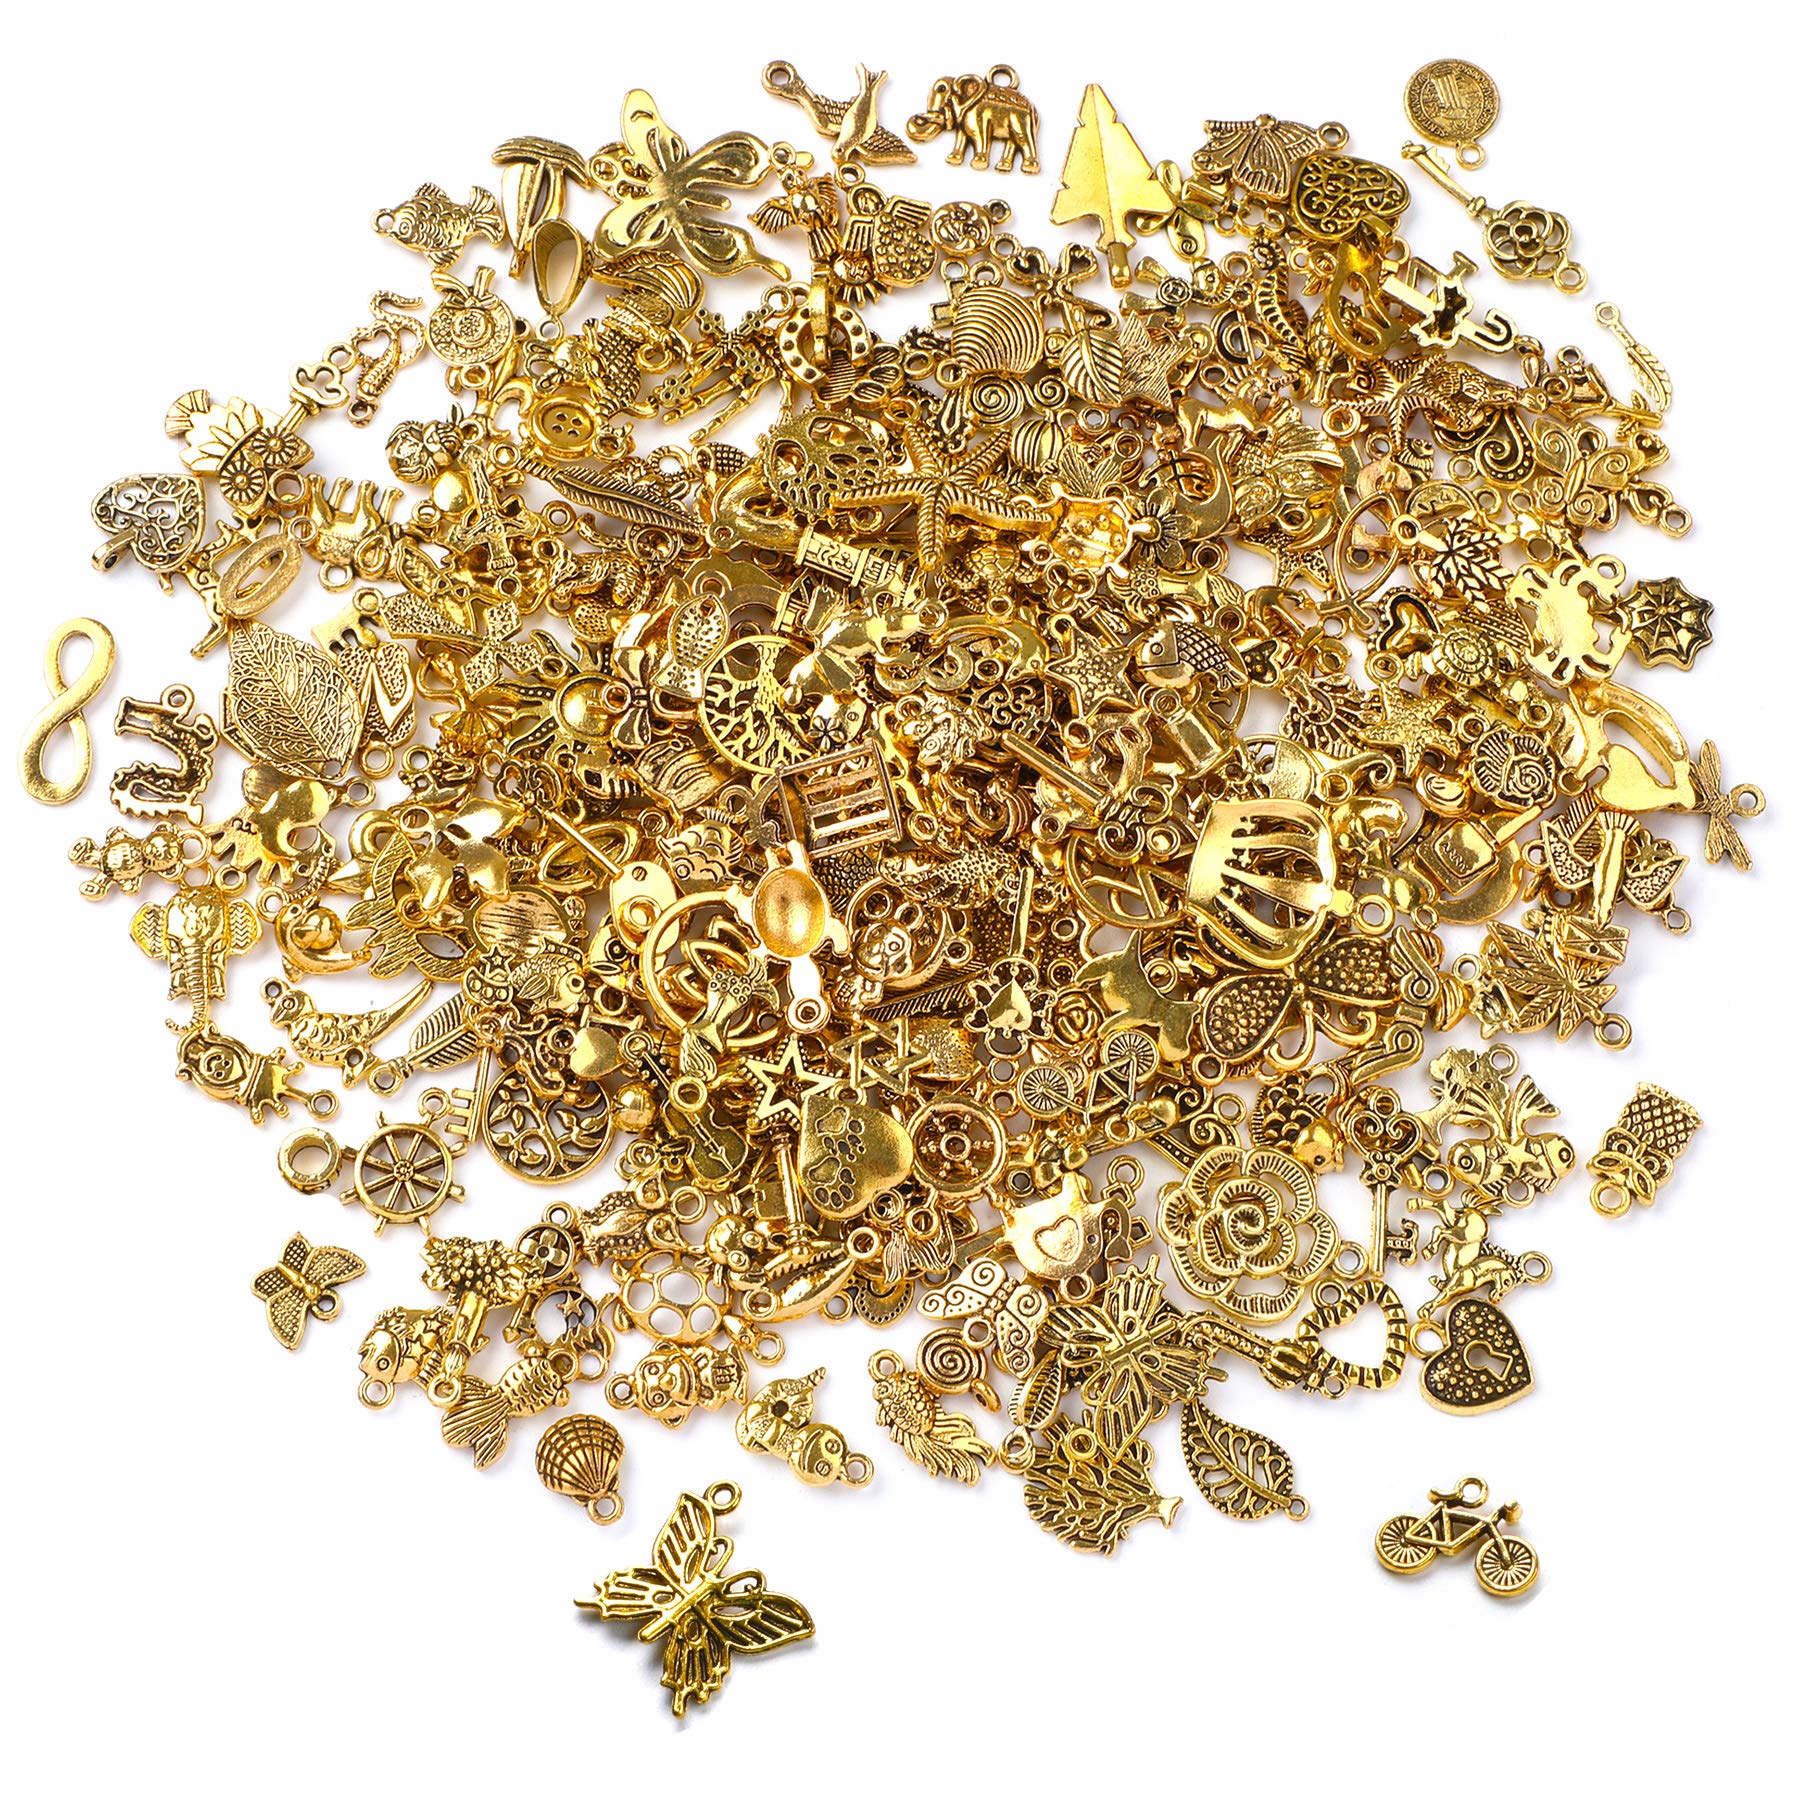 SANNIX 350Pcs Antique Gold Charms Bulk Lots Jewelry Making Charms Assorted Pendants for DIY Necklace Bracelet Earring Making and